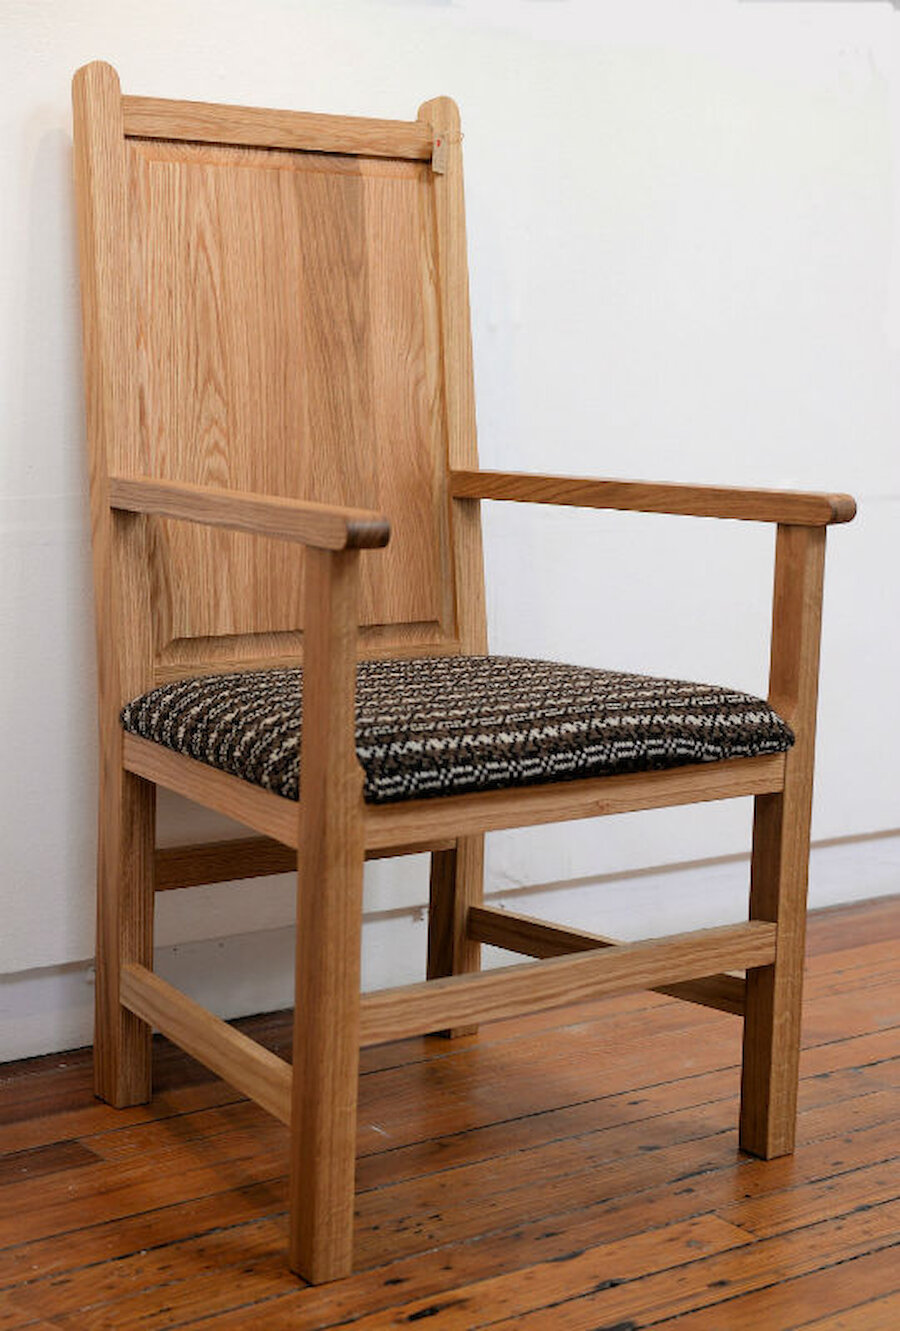 A beautifully-crafted chair by Cecil Tait (Courtesy Alastair Hamilton)